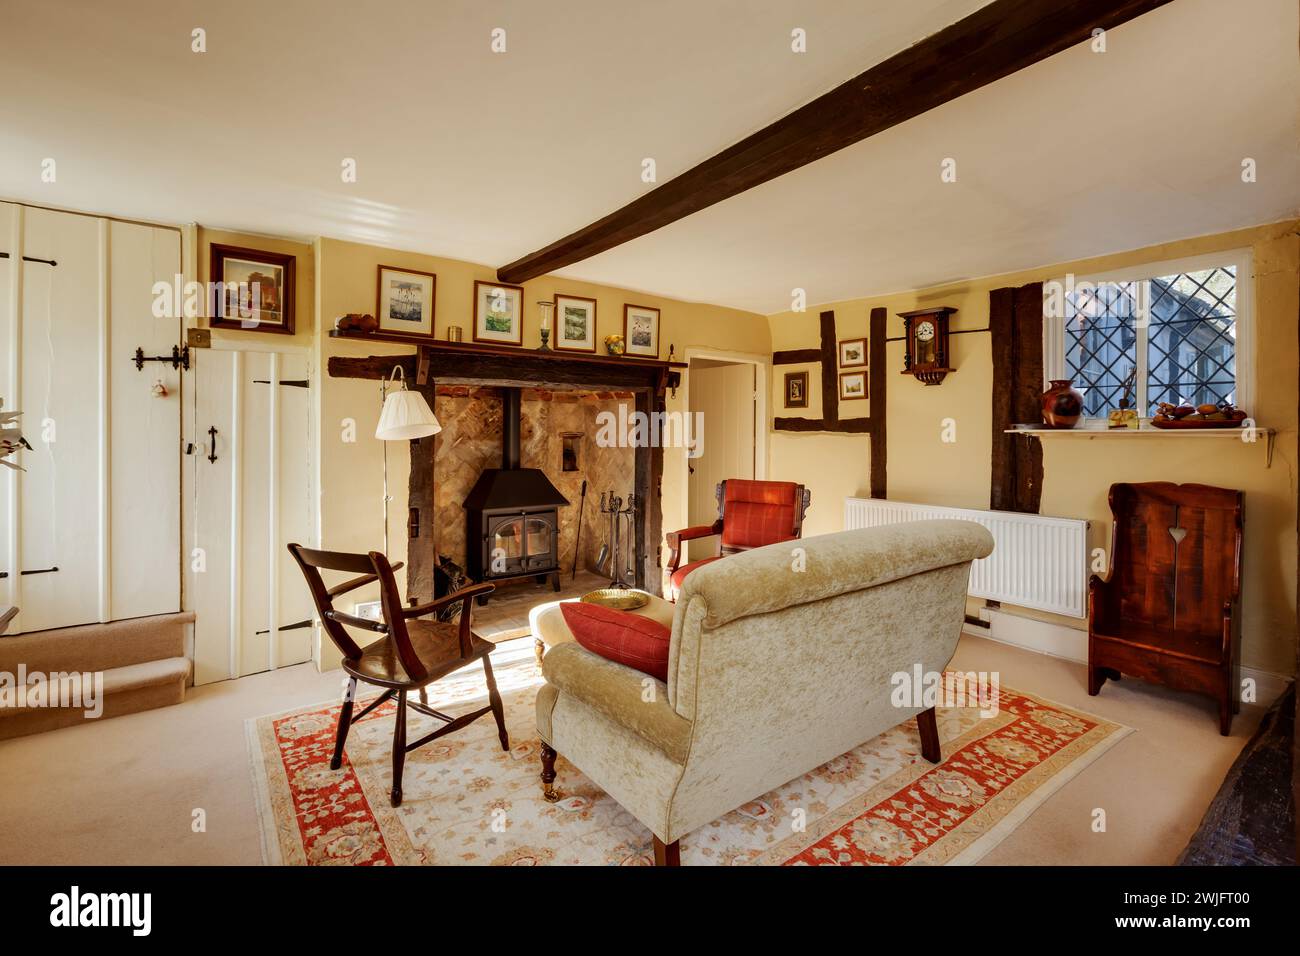 Dalham, Suffolk, England - Feb 19 2016: 16th Century cottage living room with fireplace Stock Photo